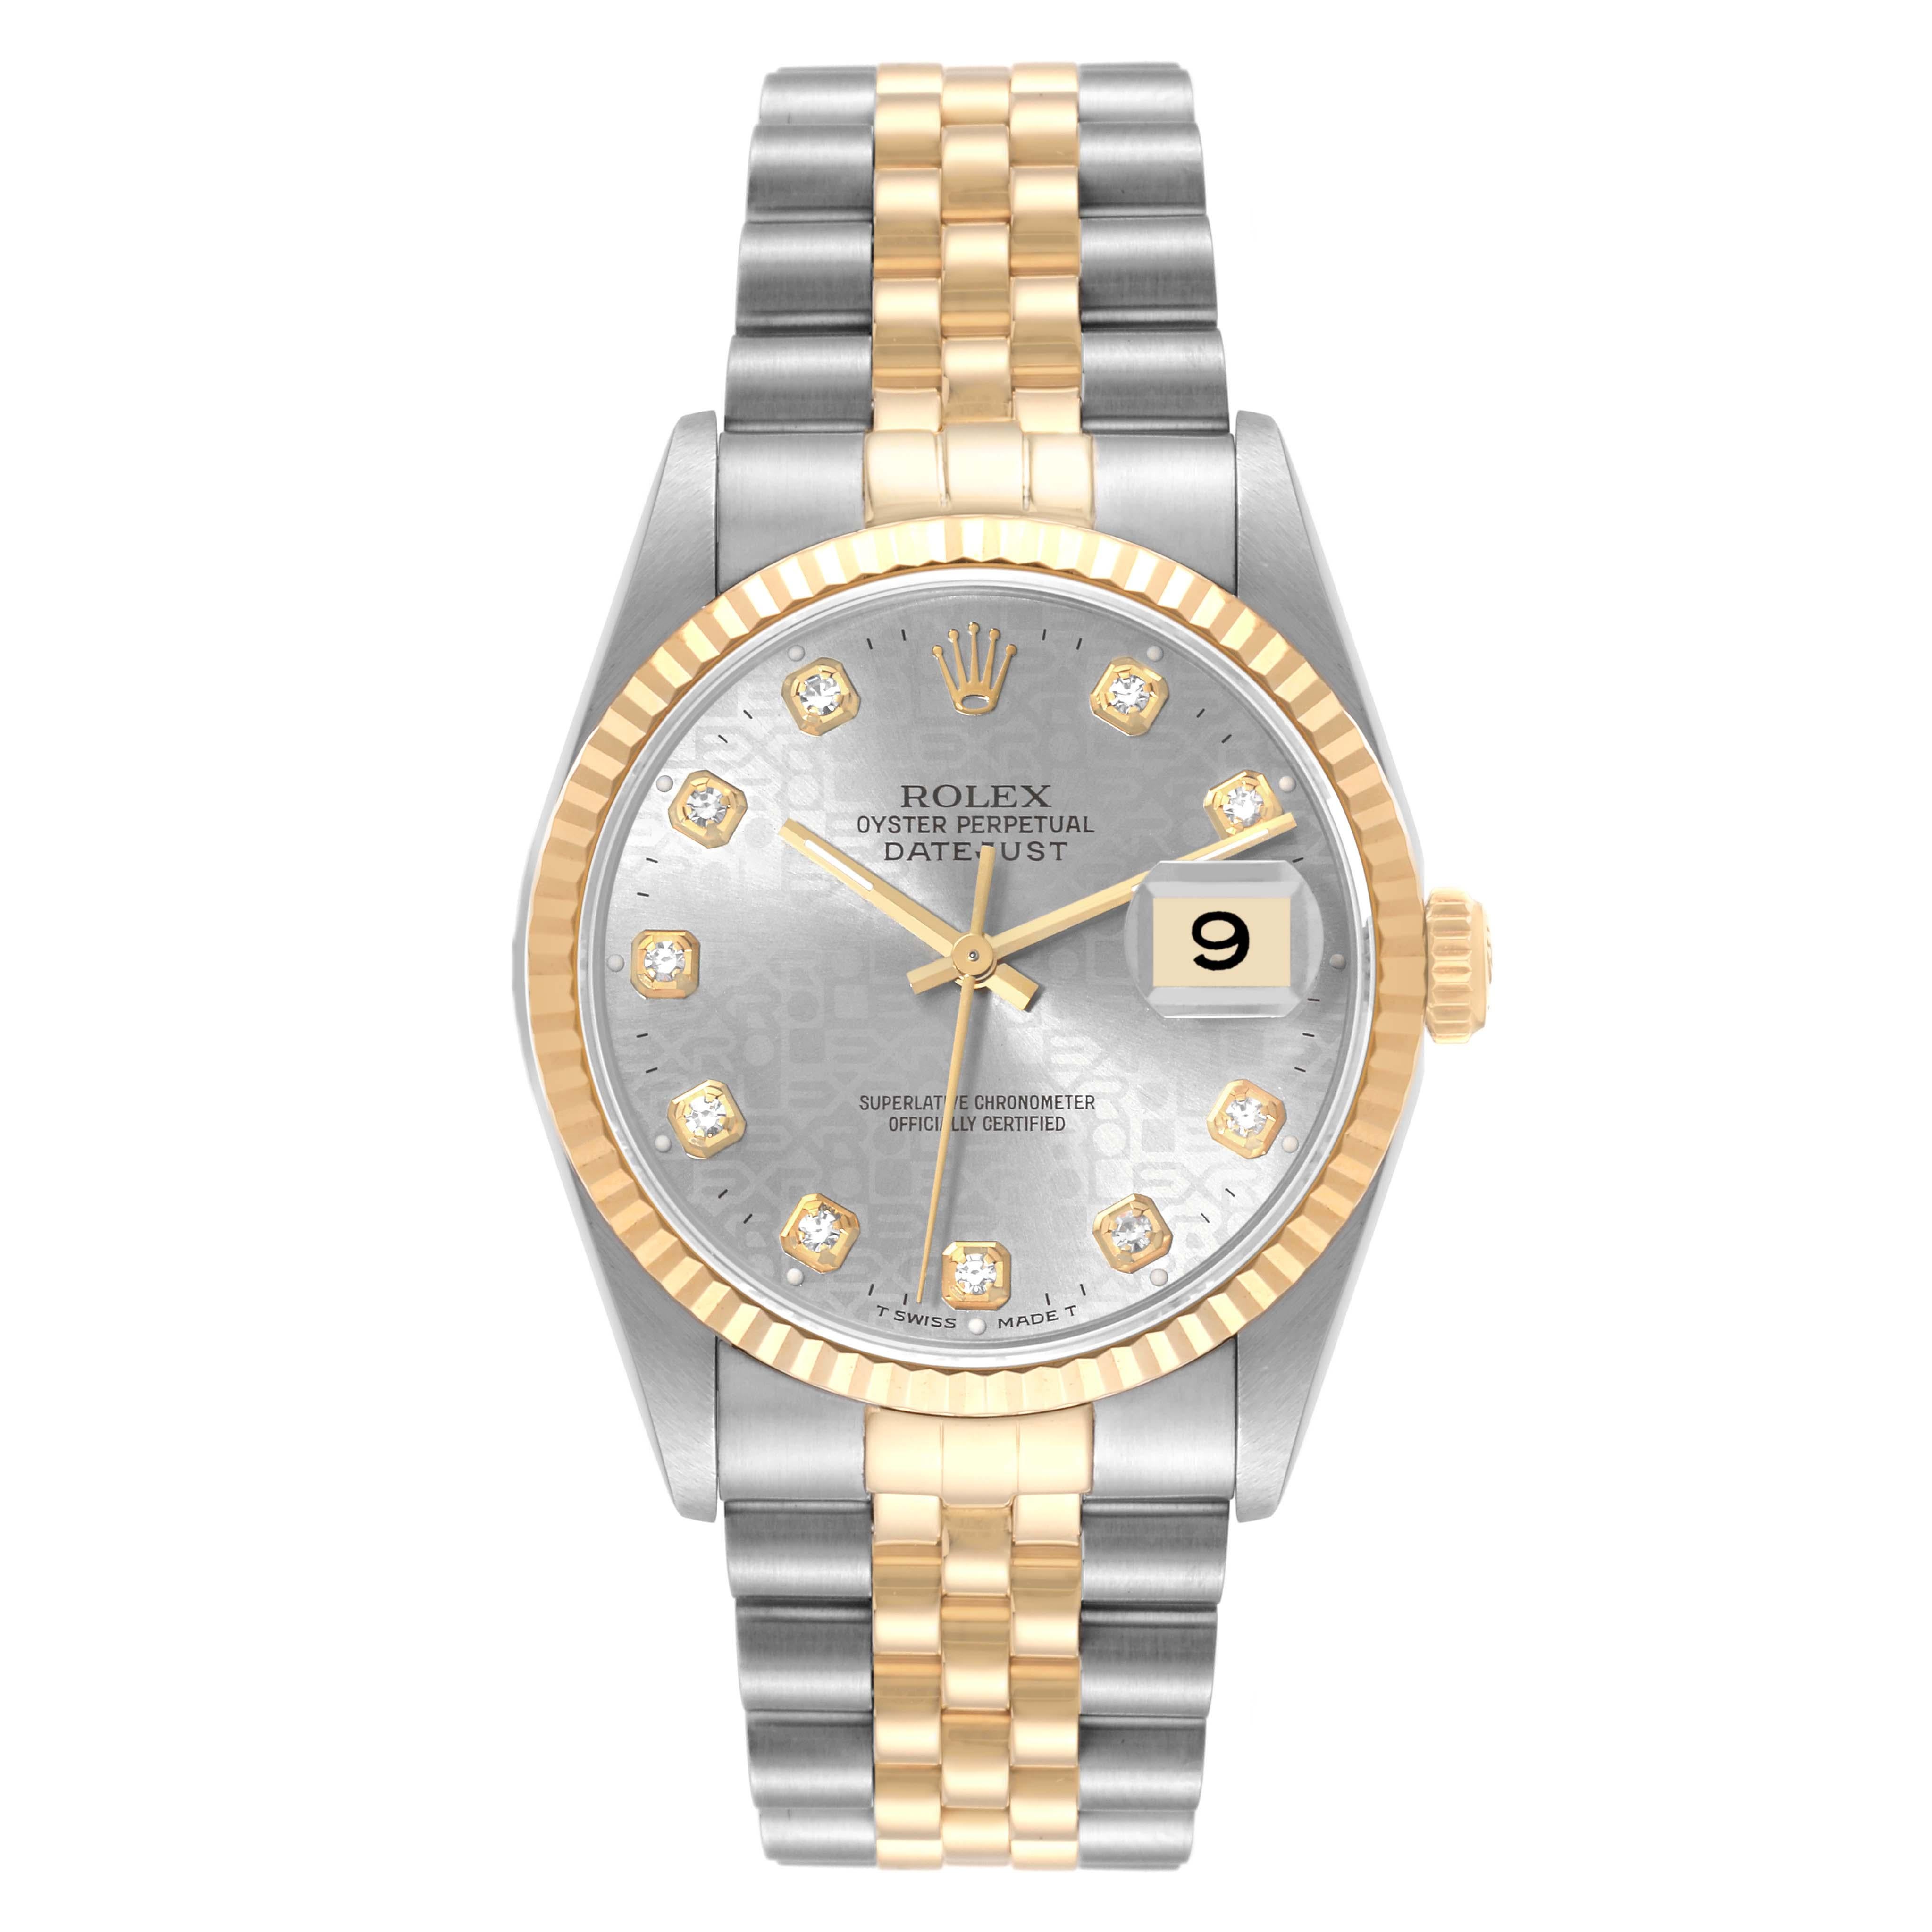 Rolex Datejust Steel Yellow Gold Diamond Anniversary Dial Mens Watch 16233. Officially certified chronometer automatic self-winding movement. Stainless steel case 36 mm in diameter.  Rolex logo on an 18K yellow gold crown. 18k yellow gold fluted